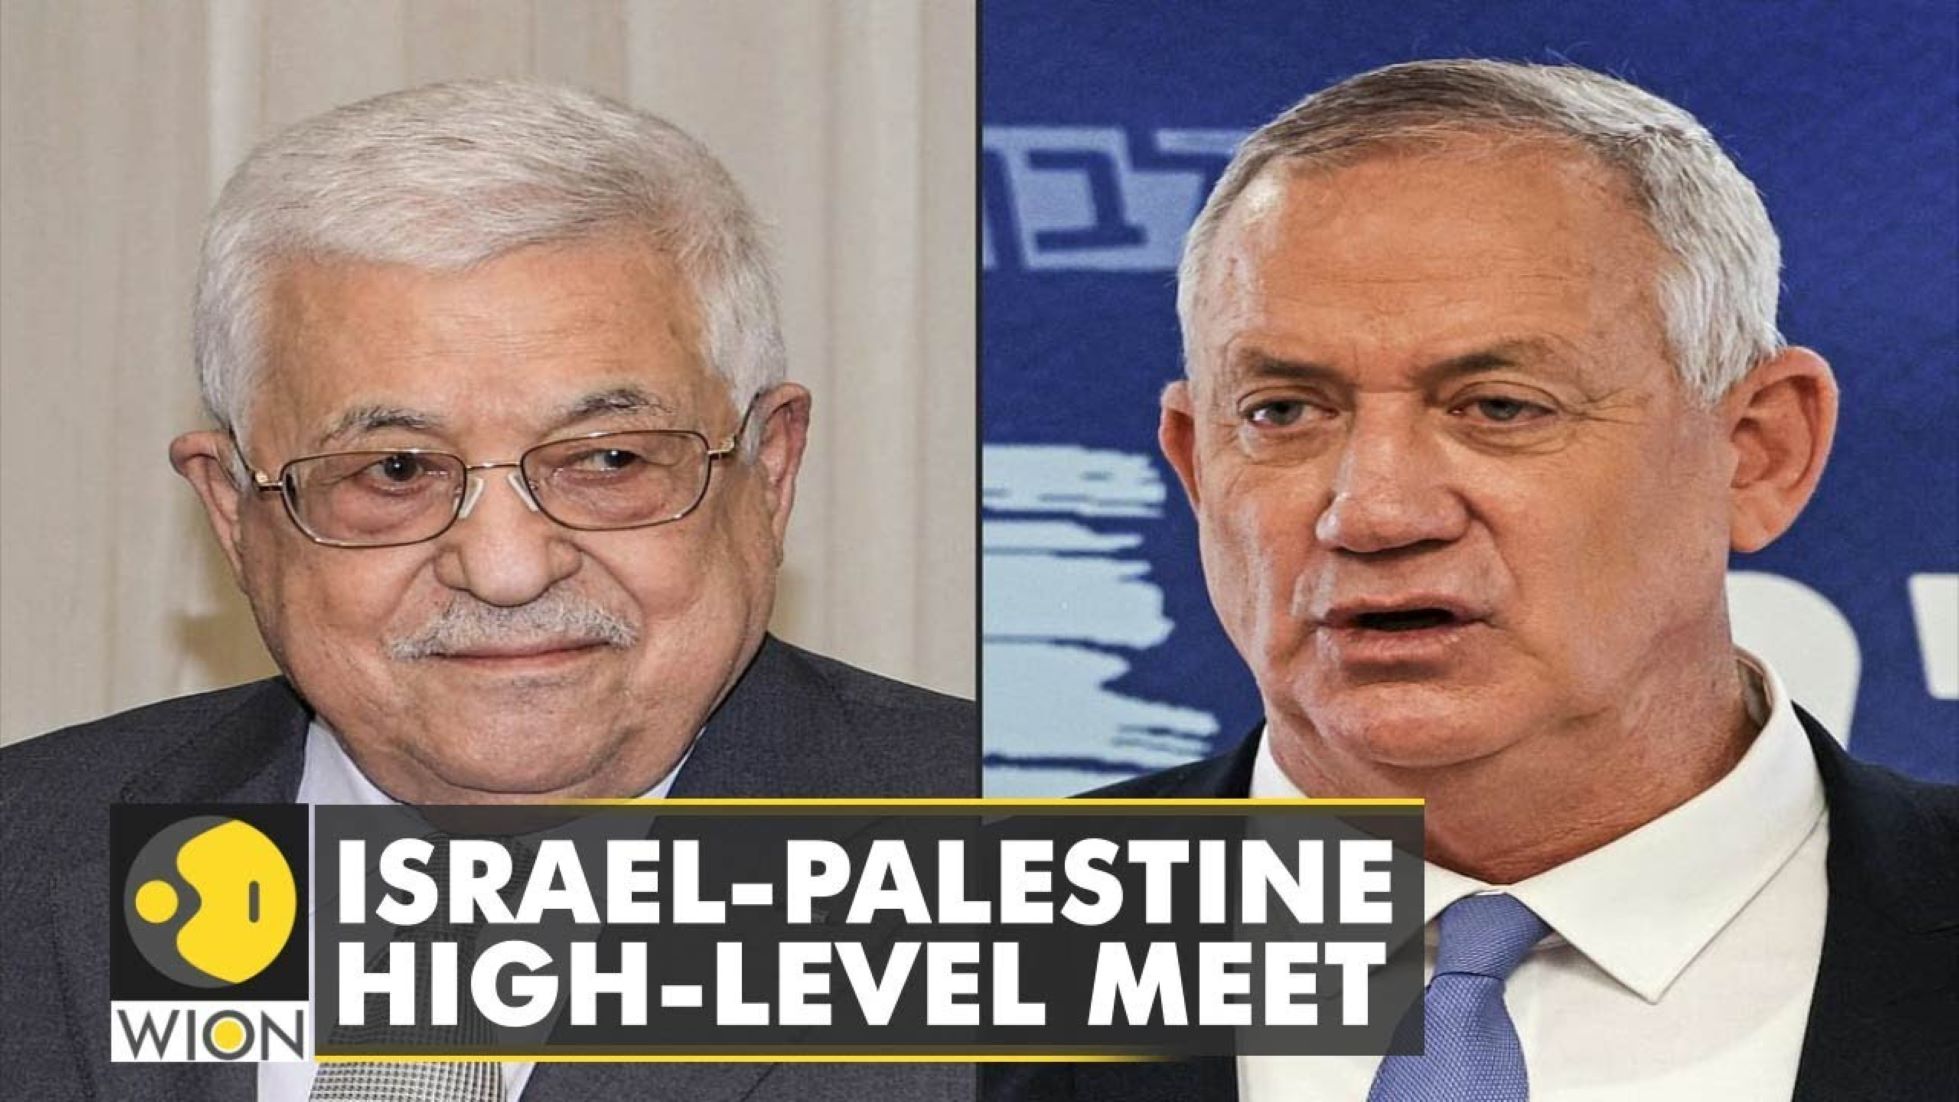 Palestinian President Met With Israeli Defence Minister